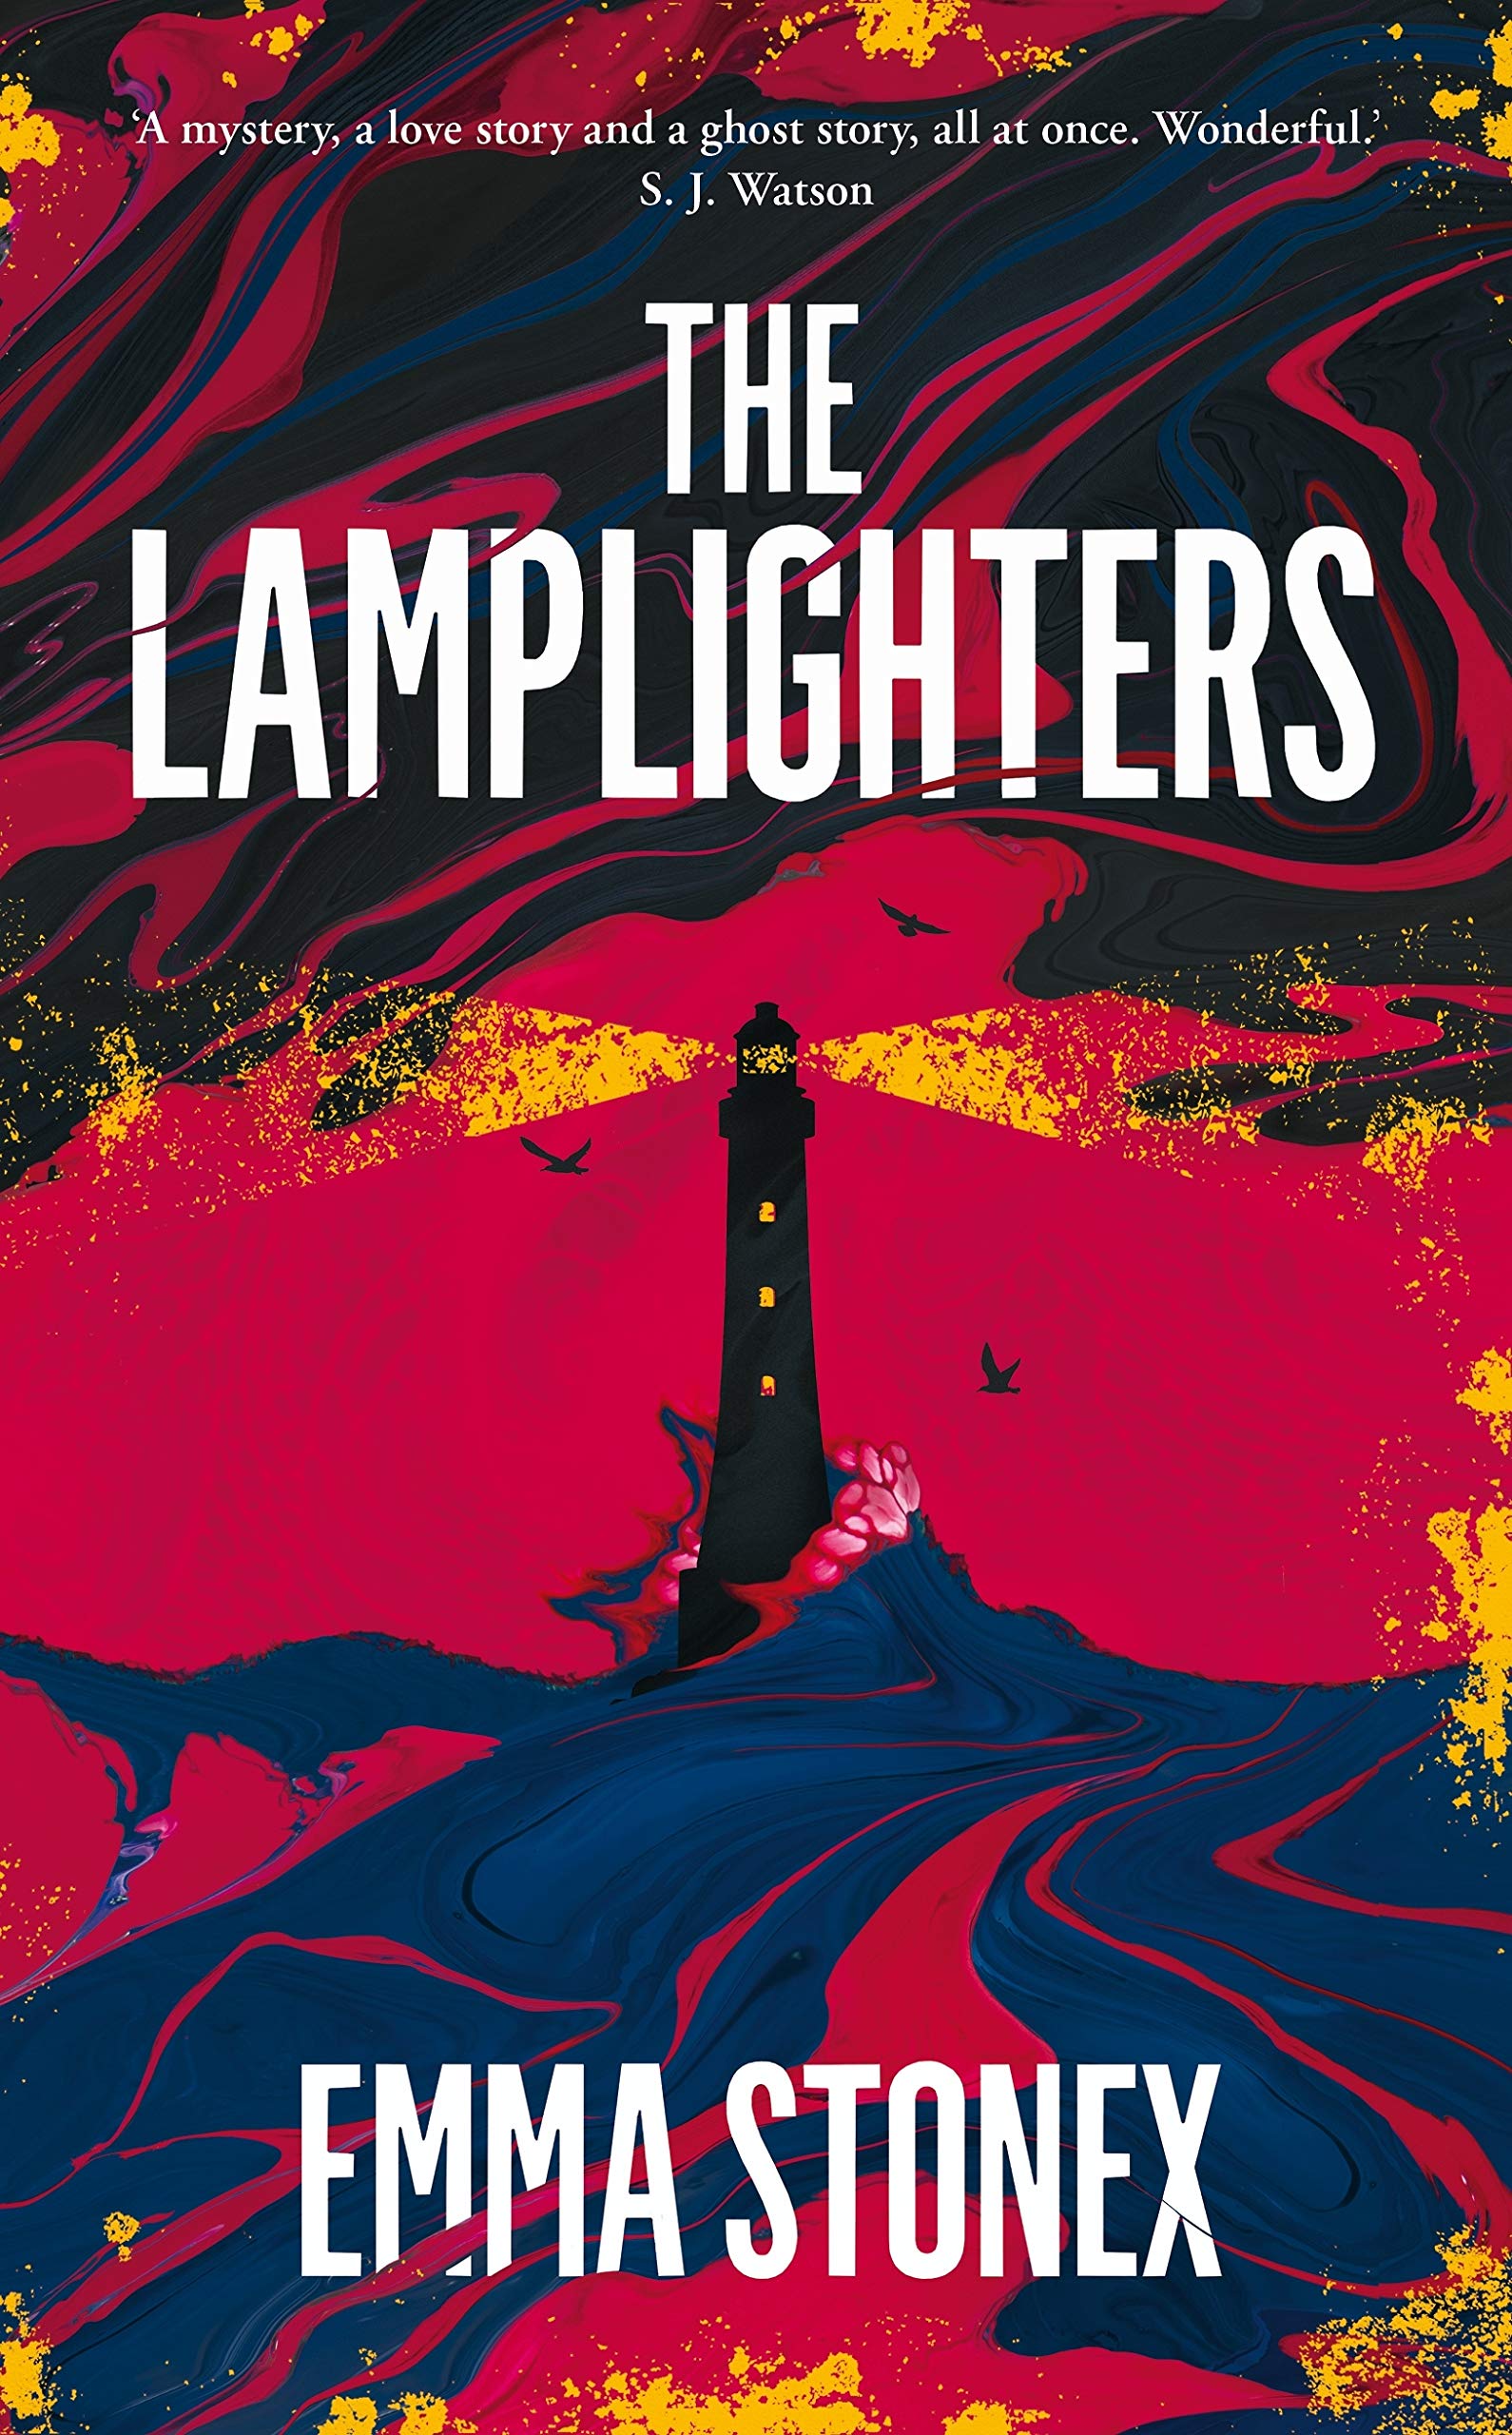 Book Review: The Lamplighters